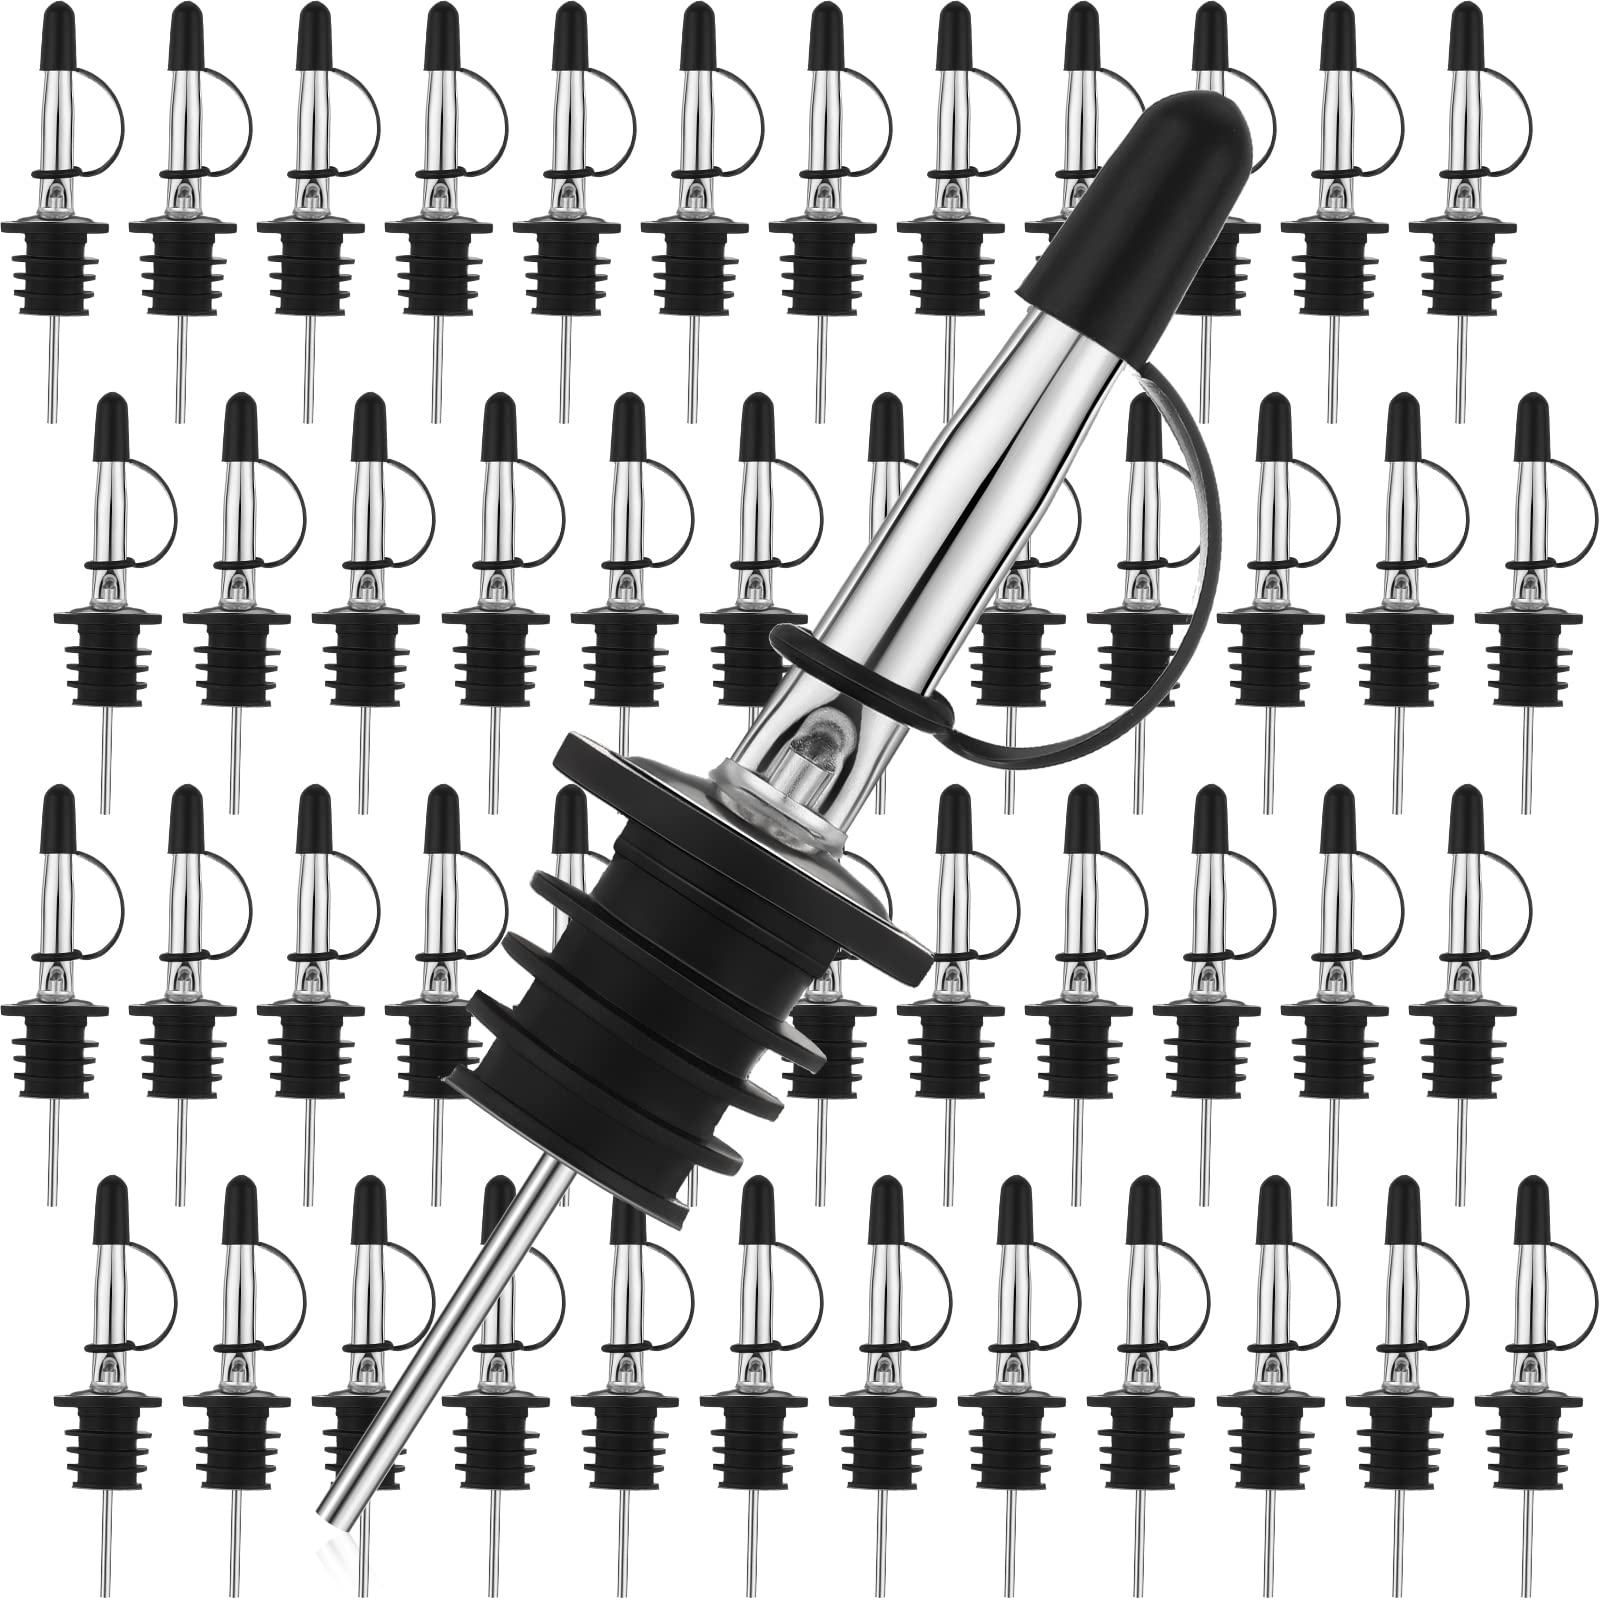 Epakh 120 Pieces Speed Liquor Bottles Pourer, Stainless Steel Liquor Spout Wine Alcohol Pourers with Siamese Rubber Cap Bar Tapered Fits Most Classic Bottle Mouth 3/4 Inch